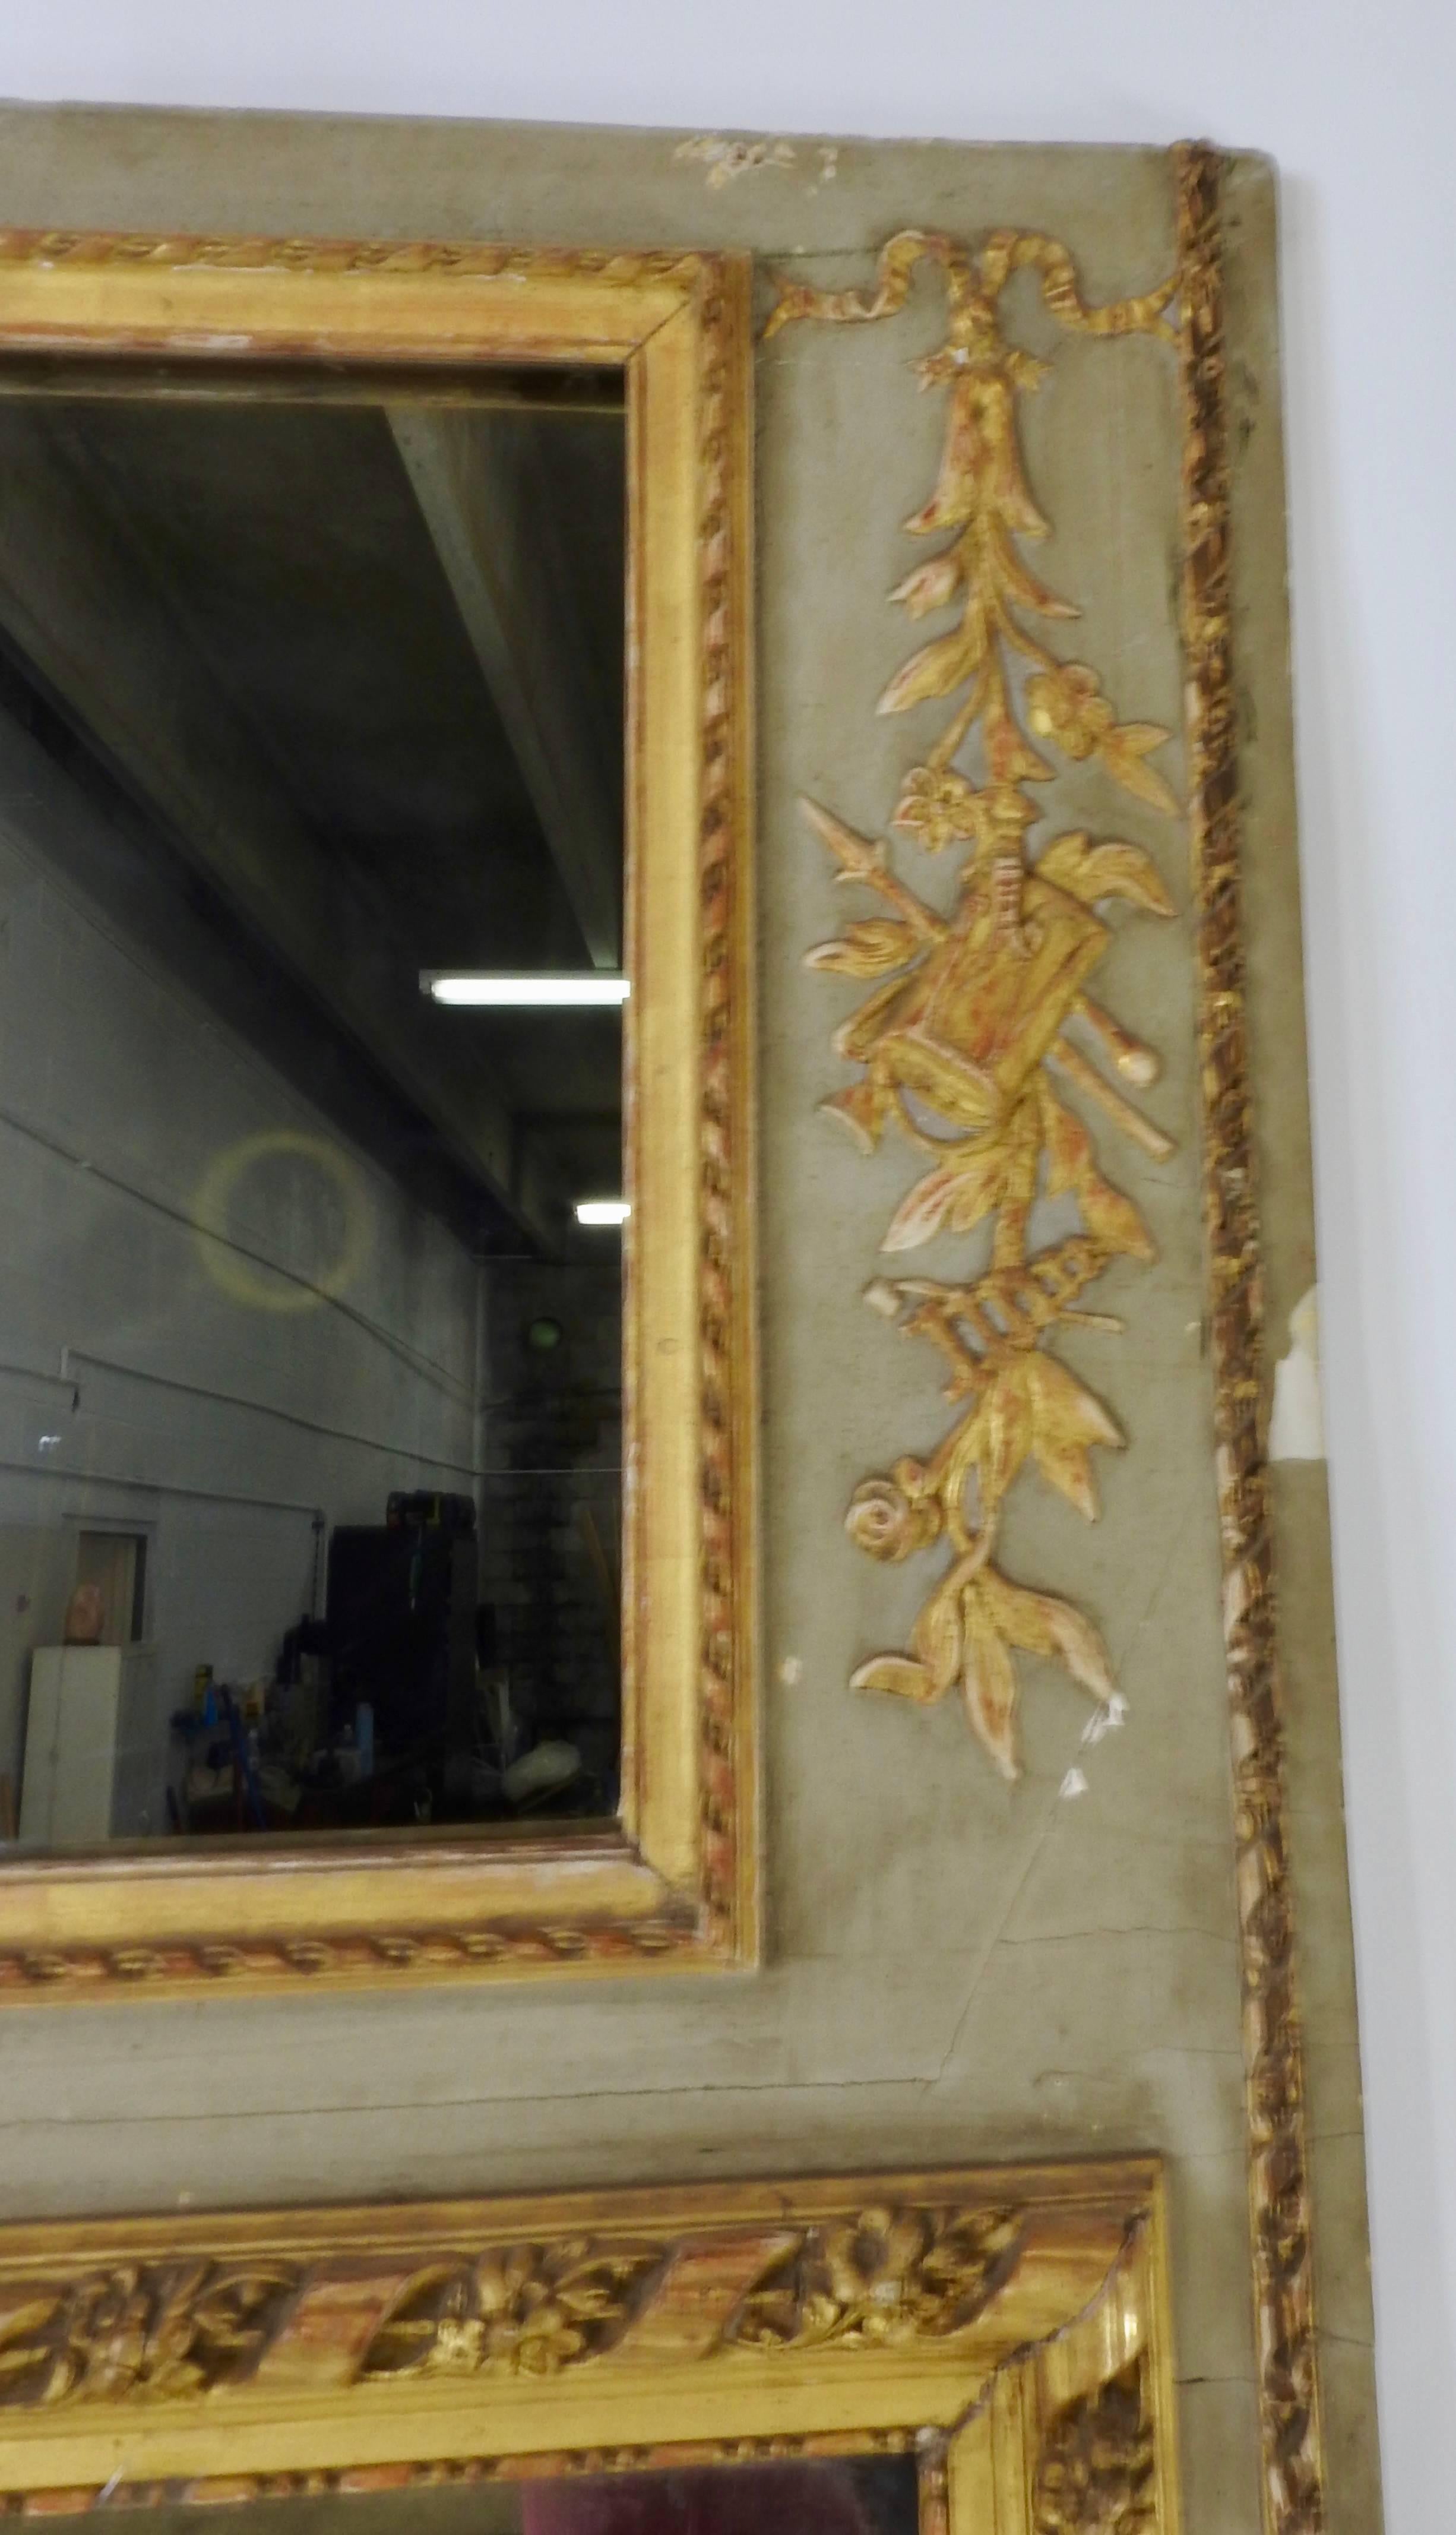 During the 19th century, this gorgeous Rococo Trumeau mirror was handmade in France. The entire mirrored frame is hand-carved with intricate floral motifs with a graceful bow accenting the top. You can see the age of the piece in its characteristic